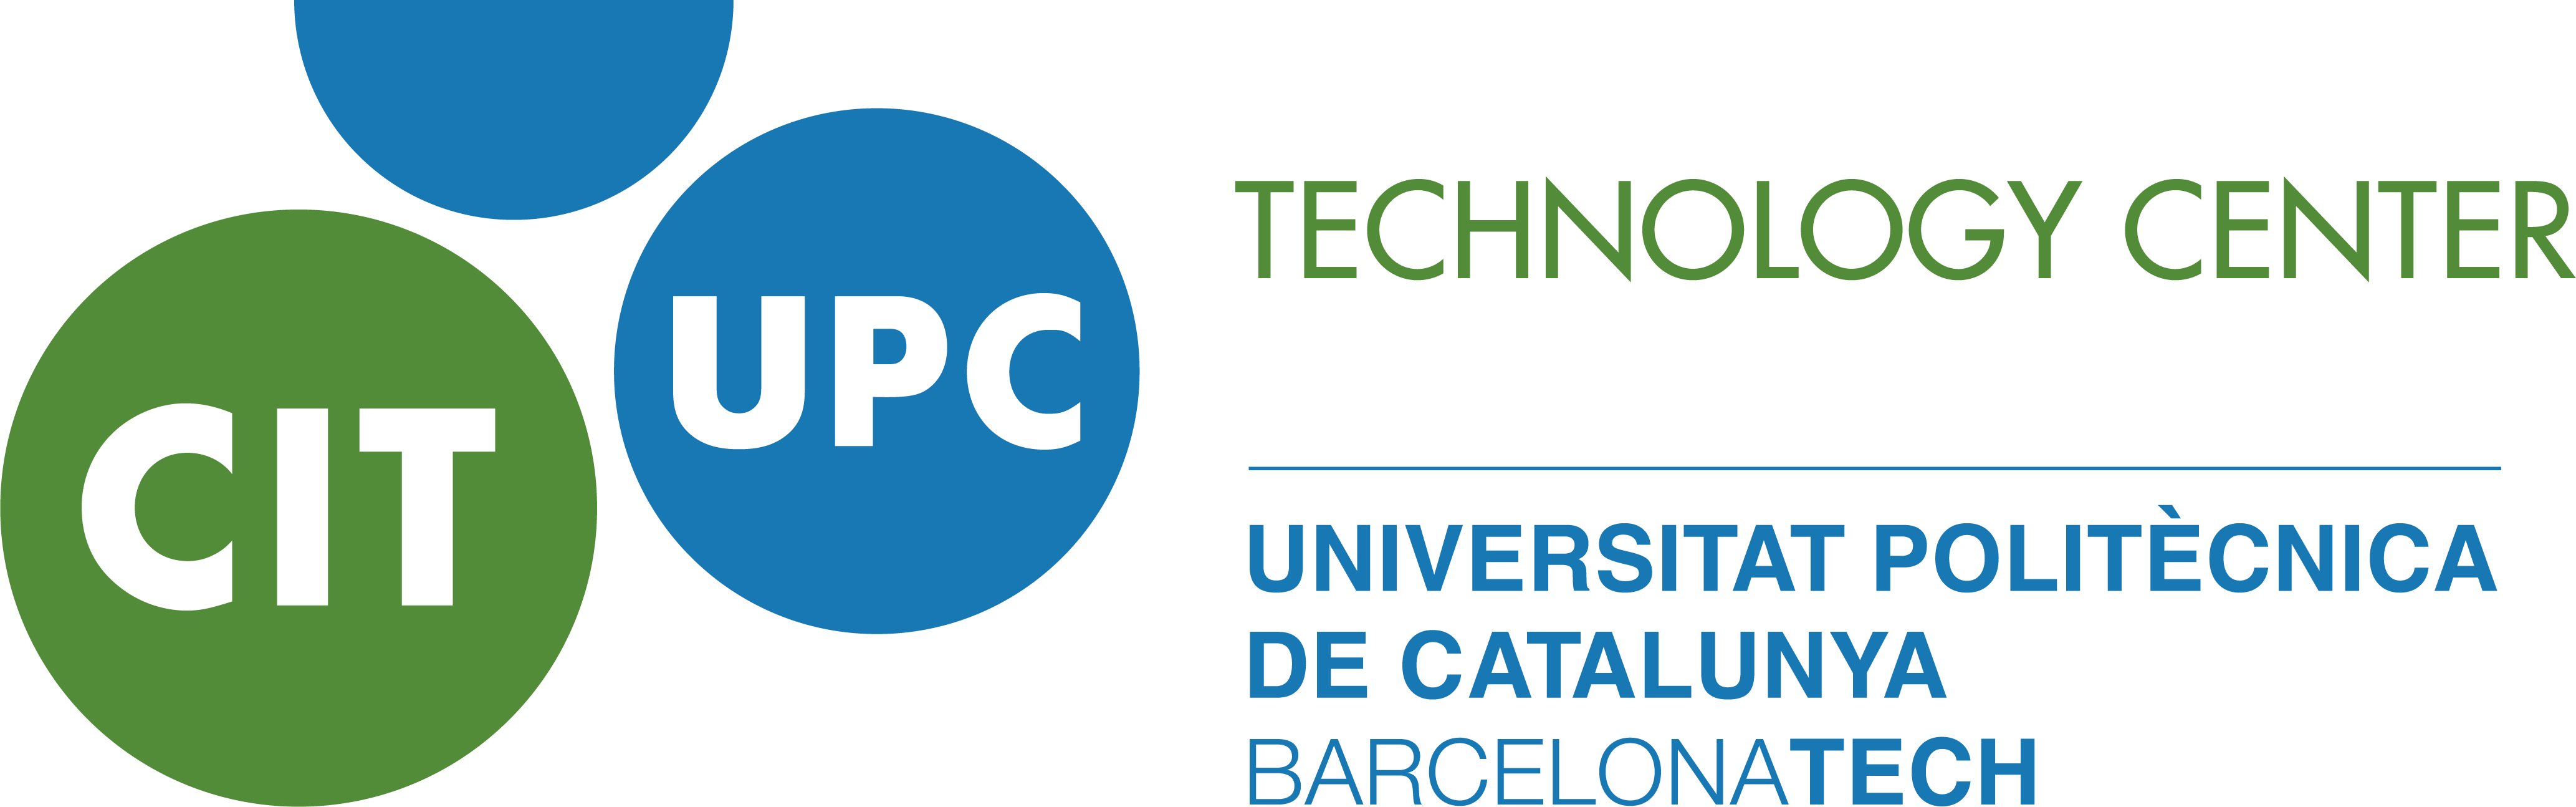 UPC and CARNET create a prototype of an autonomous vehicle for delivering goods that will be tested in Esplugues de Llobregat